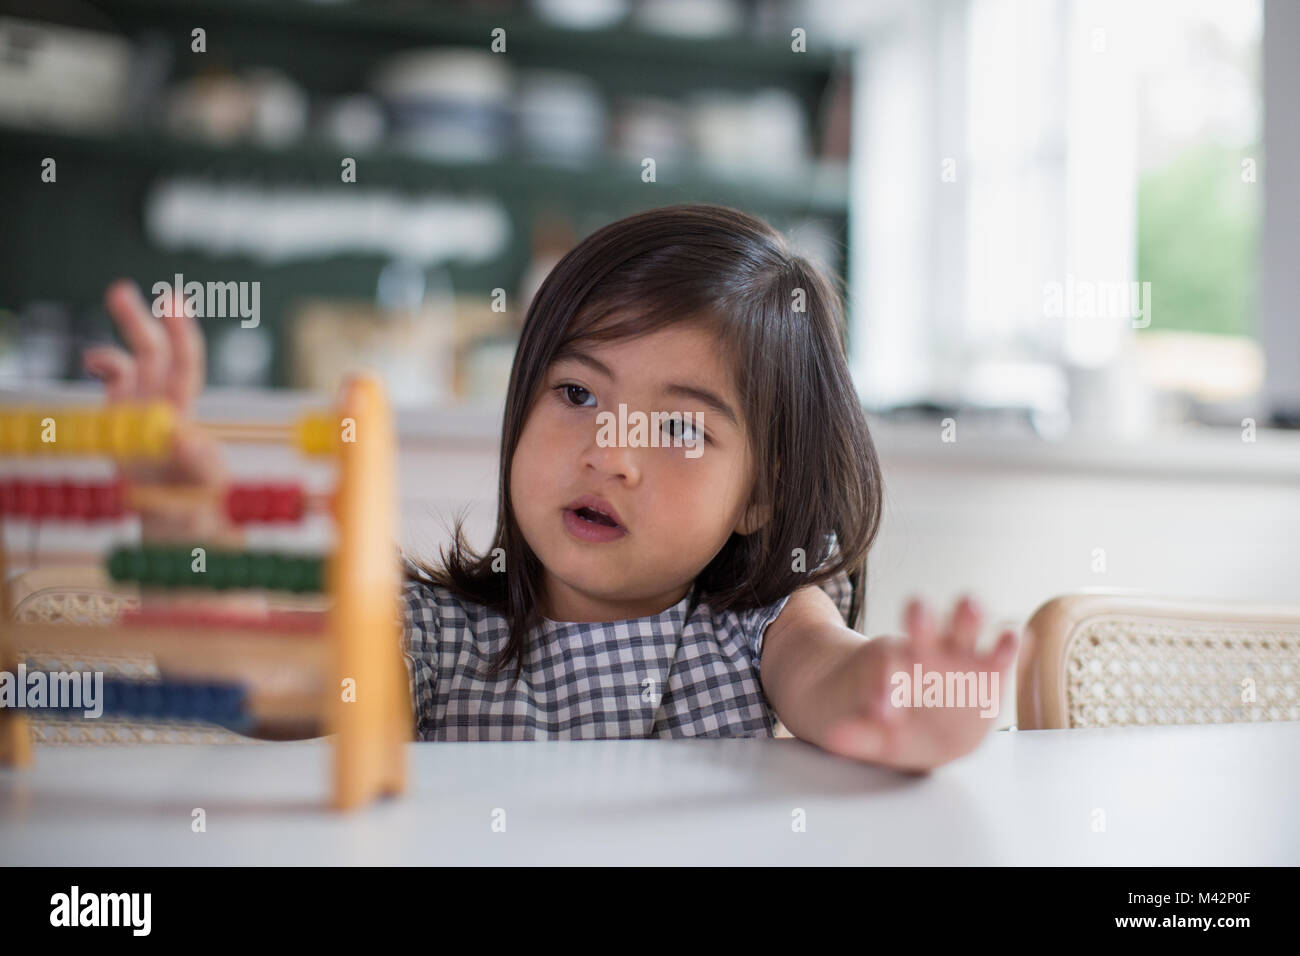 Girl using abacus to count Stock Photo